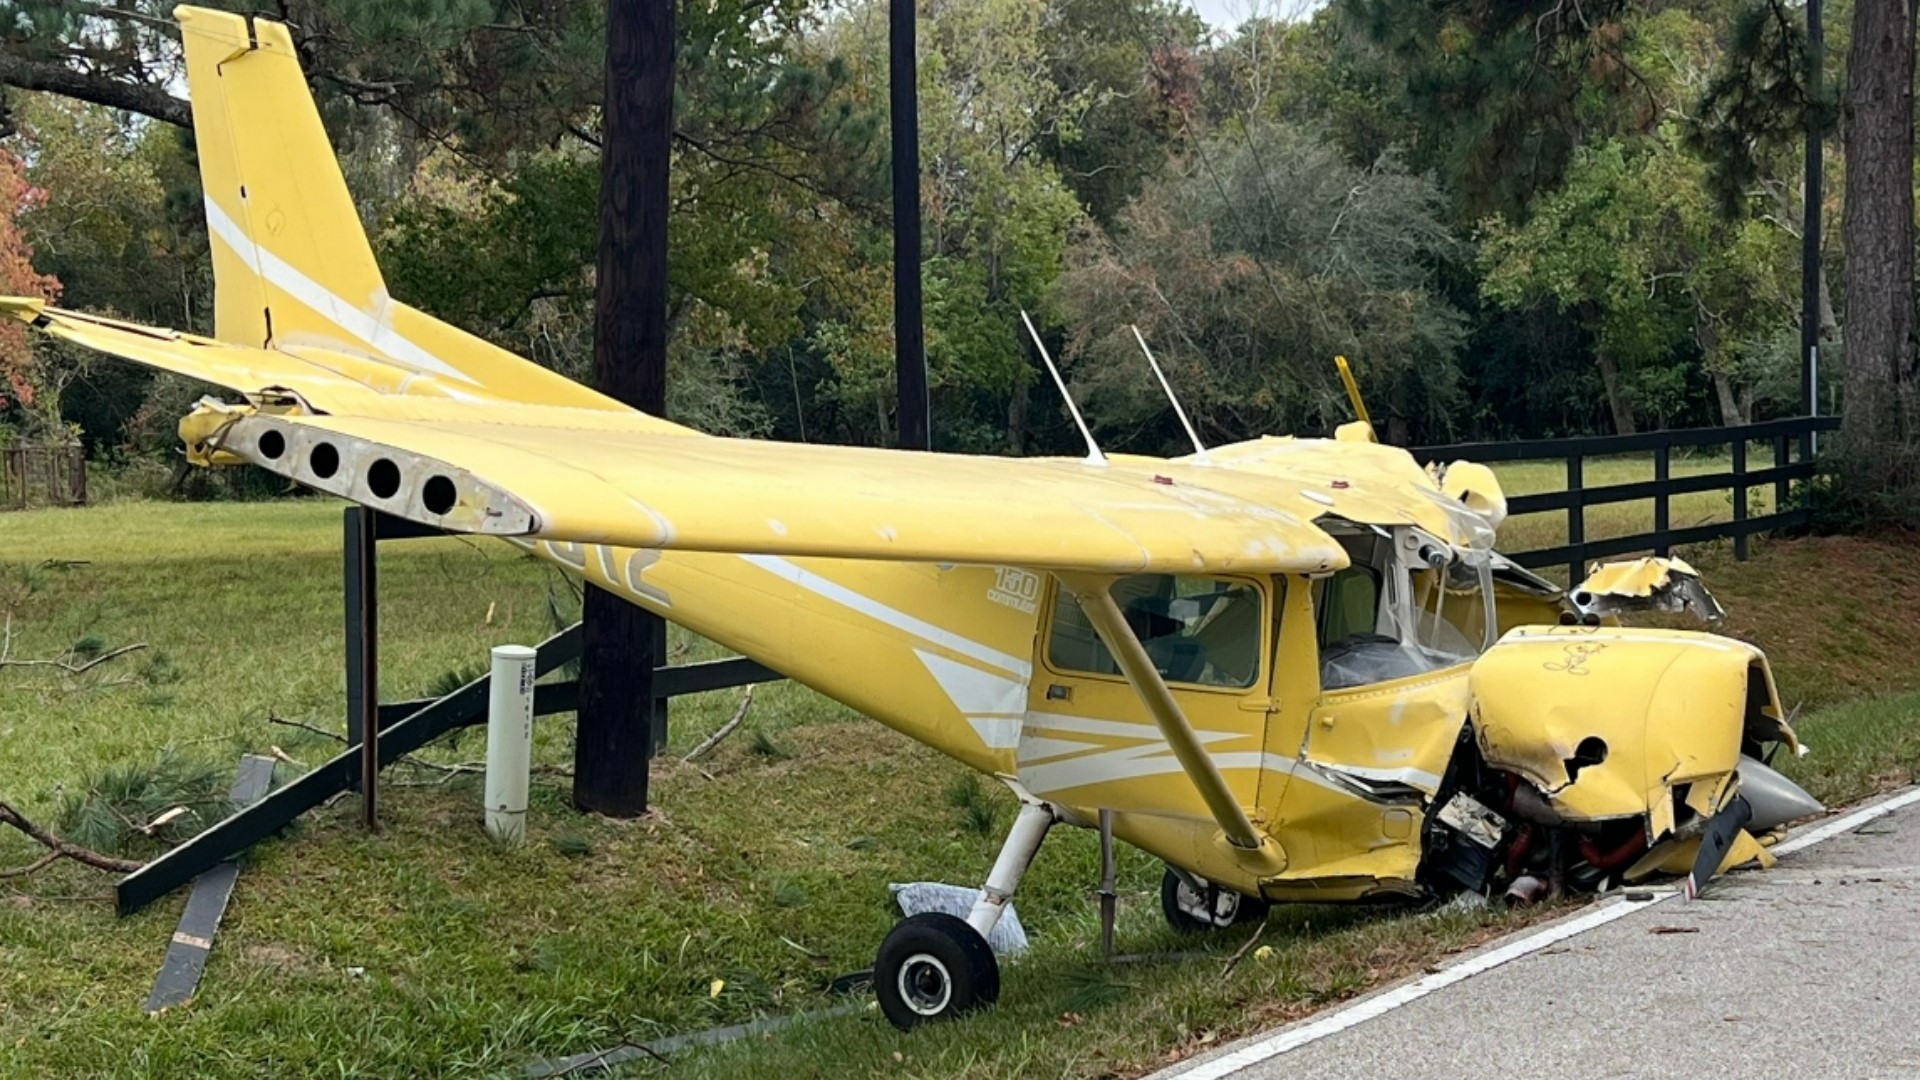 Officials said a small plane crashed in the Cypress area on Sunday. Two people were injured but are expected to survive.